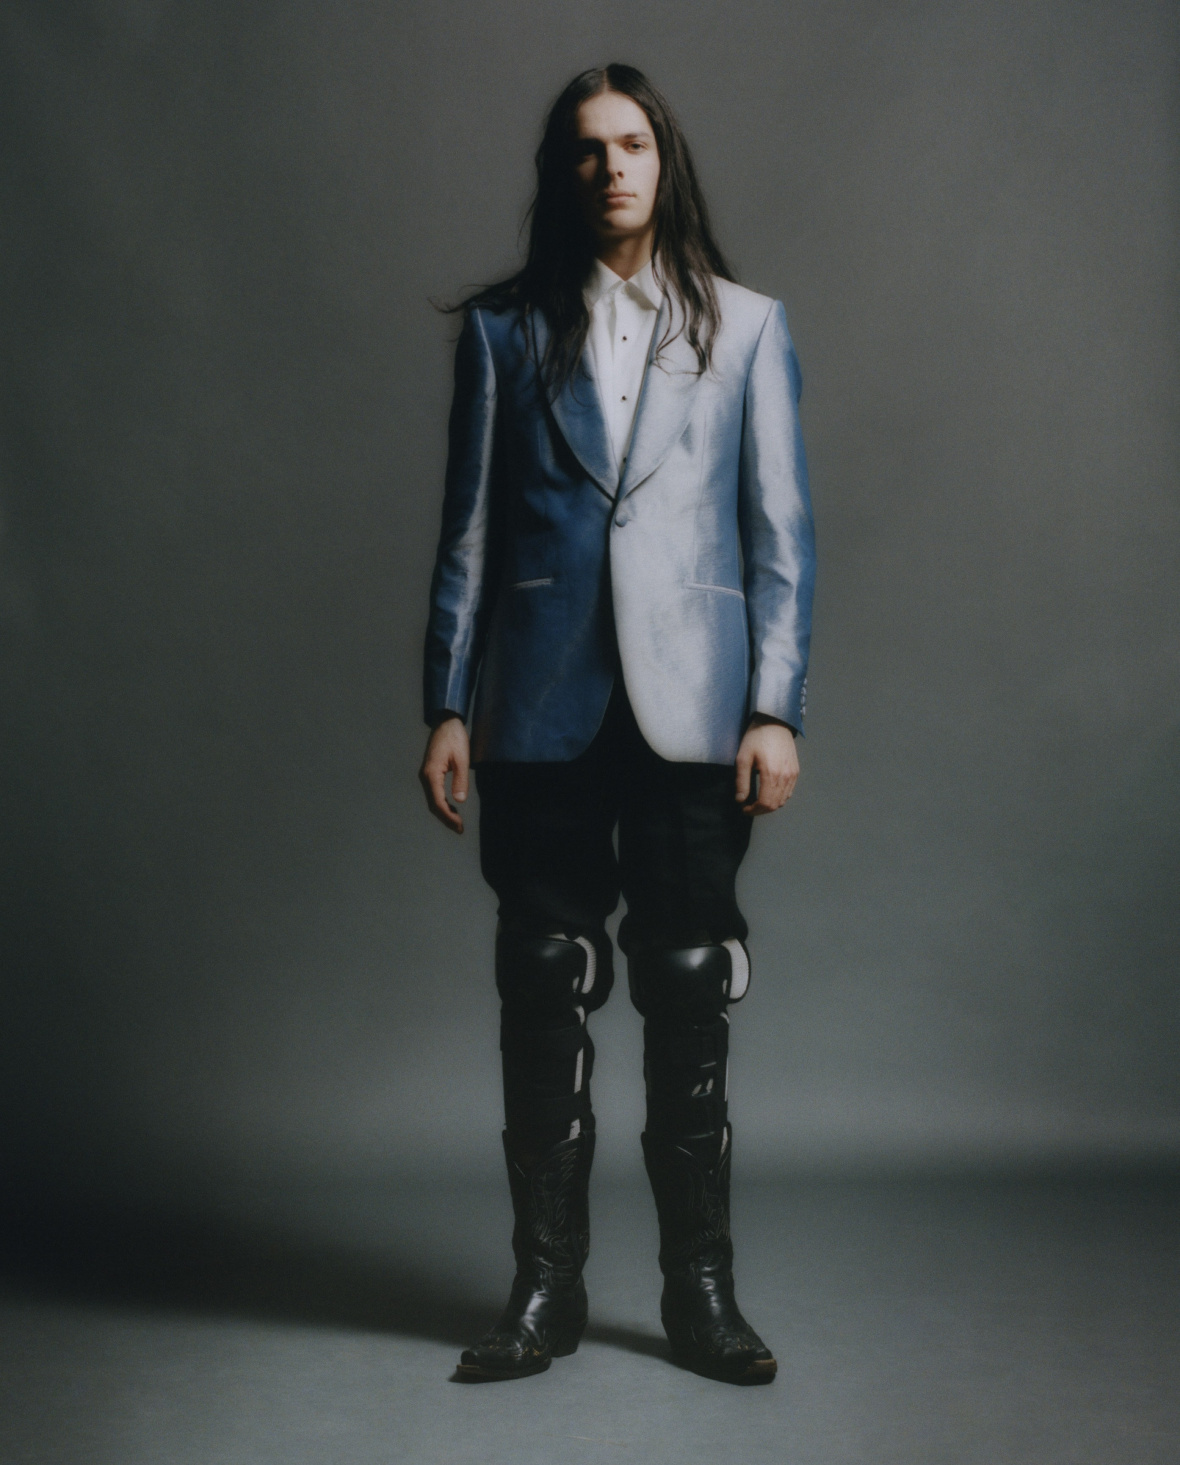 Suit Jacket, Shirt and Trousers — Gieves and Hawkes, Enduro knee protectors and boots — Stylist's own